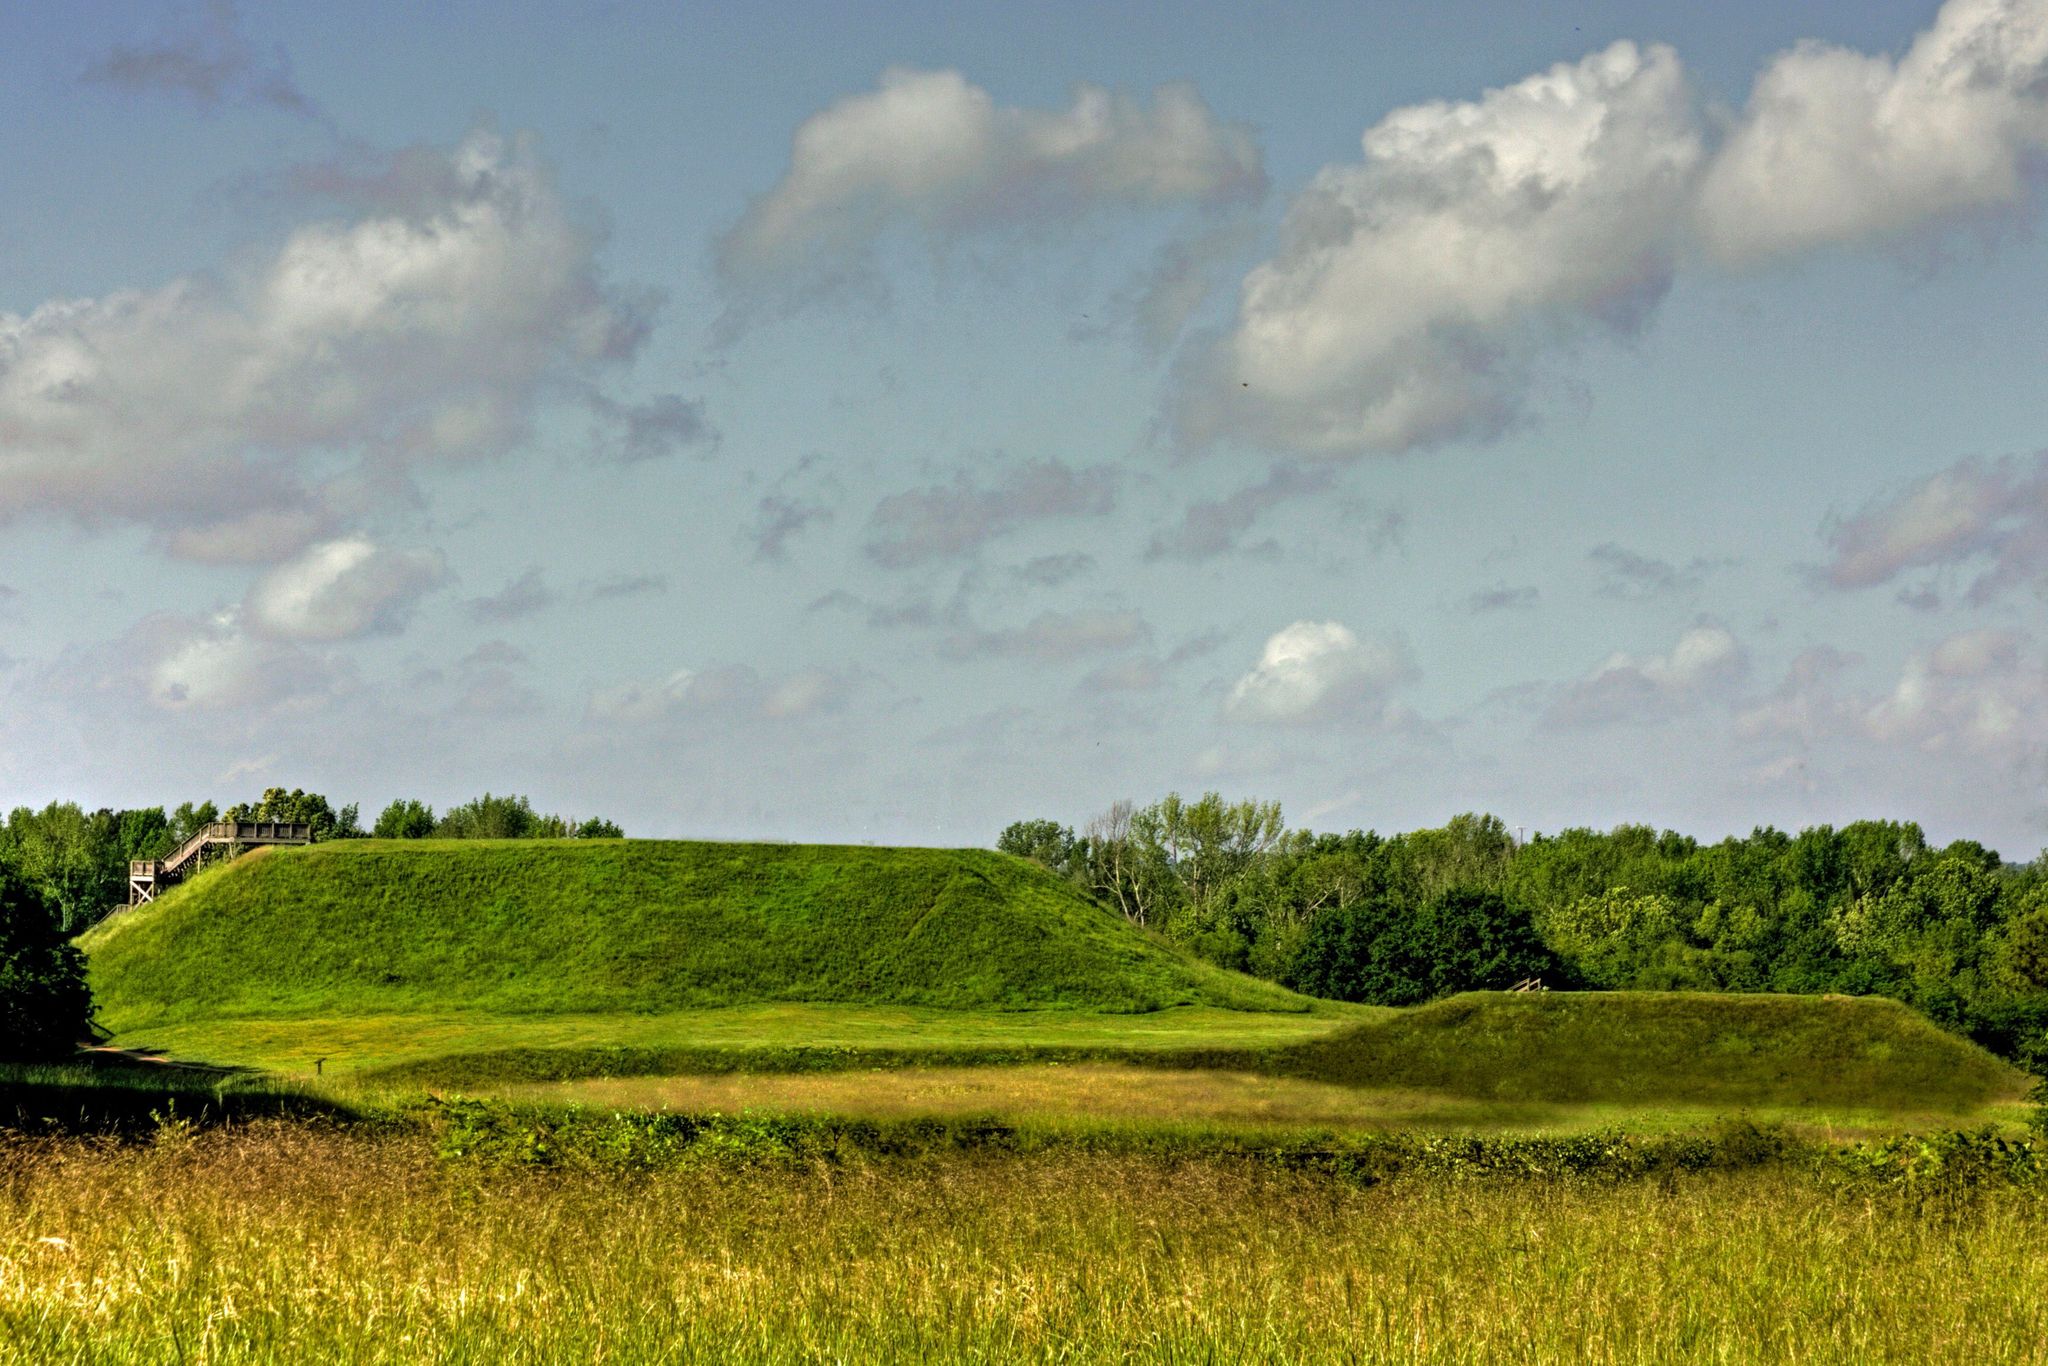 The Great Temple Mound is the largest mound at the park, it stands at 55 feet tall.